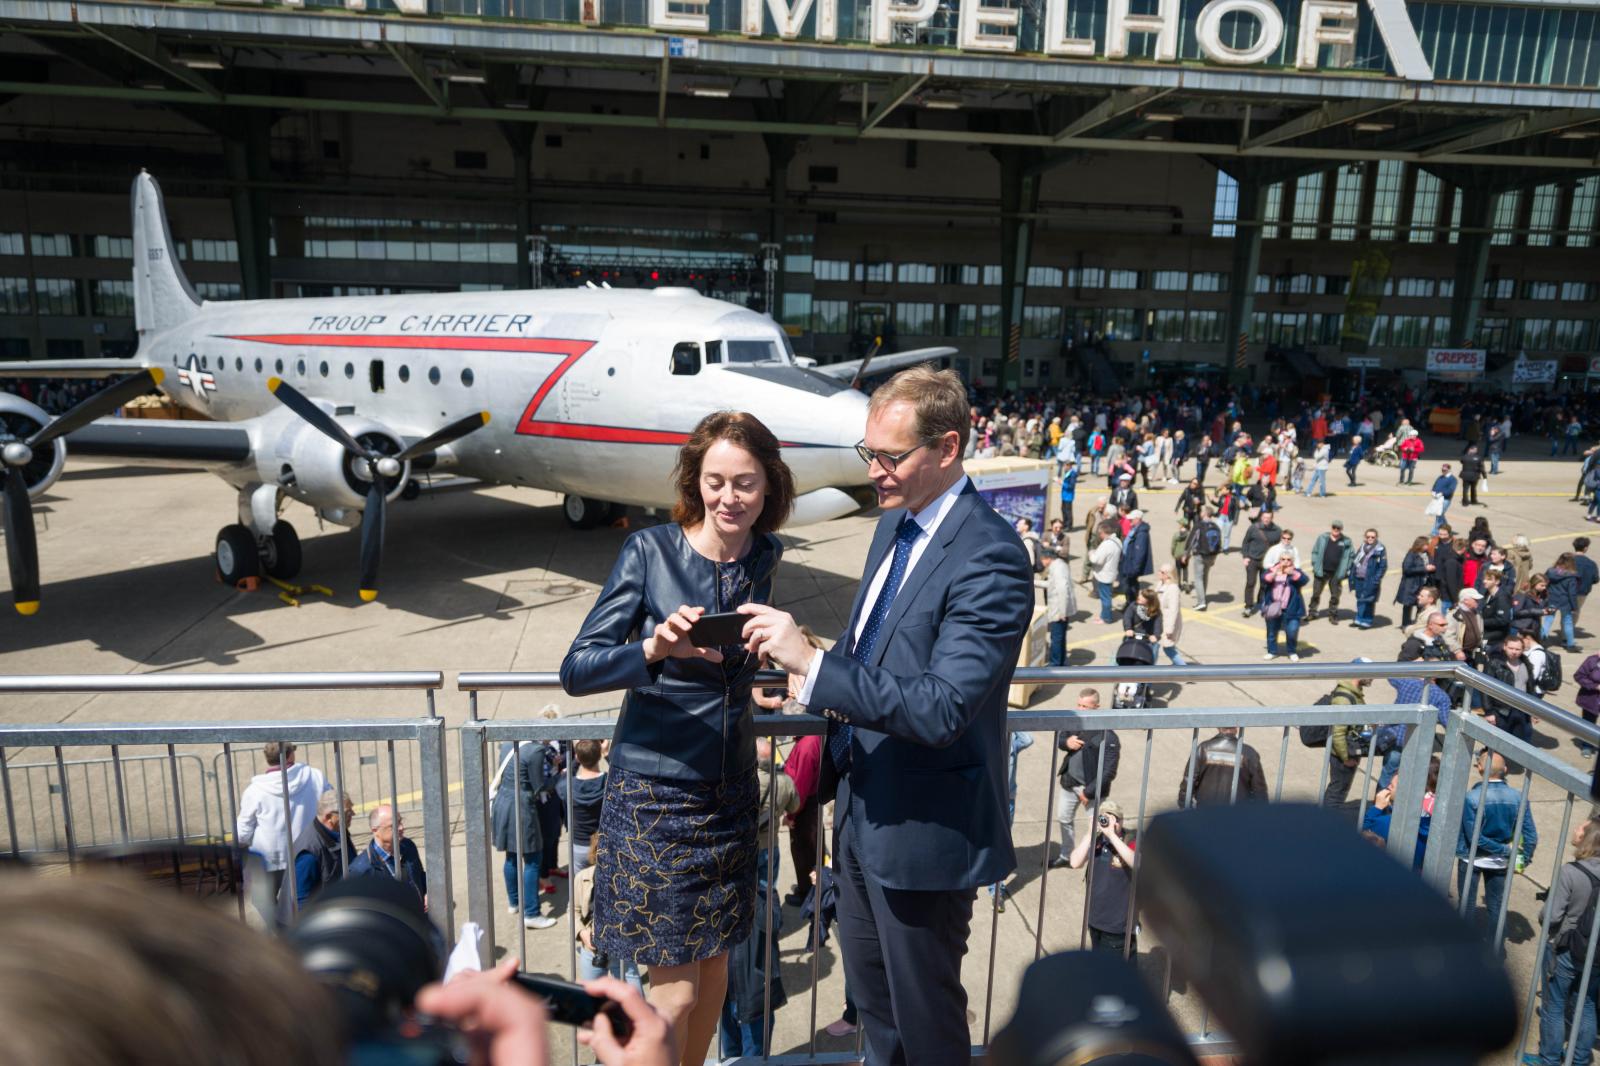 Federal Minister of Justice Katarina Barley and the Governing Mayor of Berlin Michael M&uuml;ller get ready to take a selfie in front of one of the original airplanes used by the allied forces during the Berlin blockade. May 12, 2019.